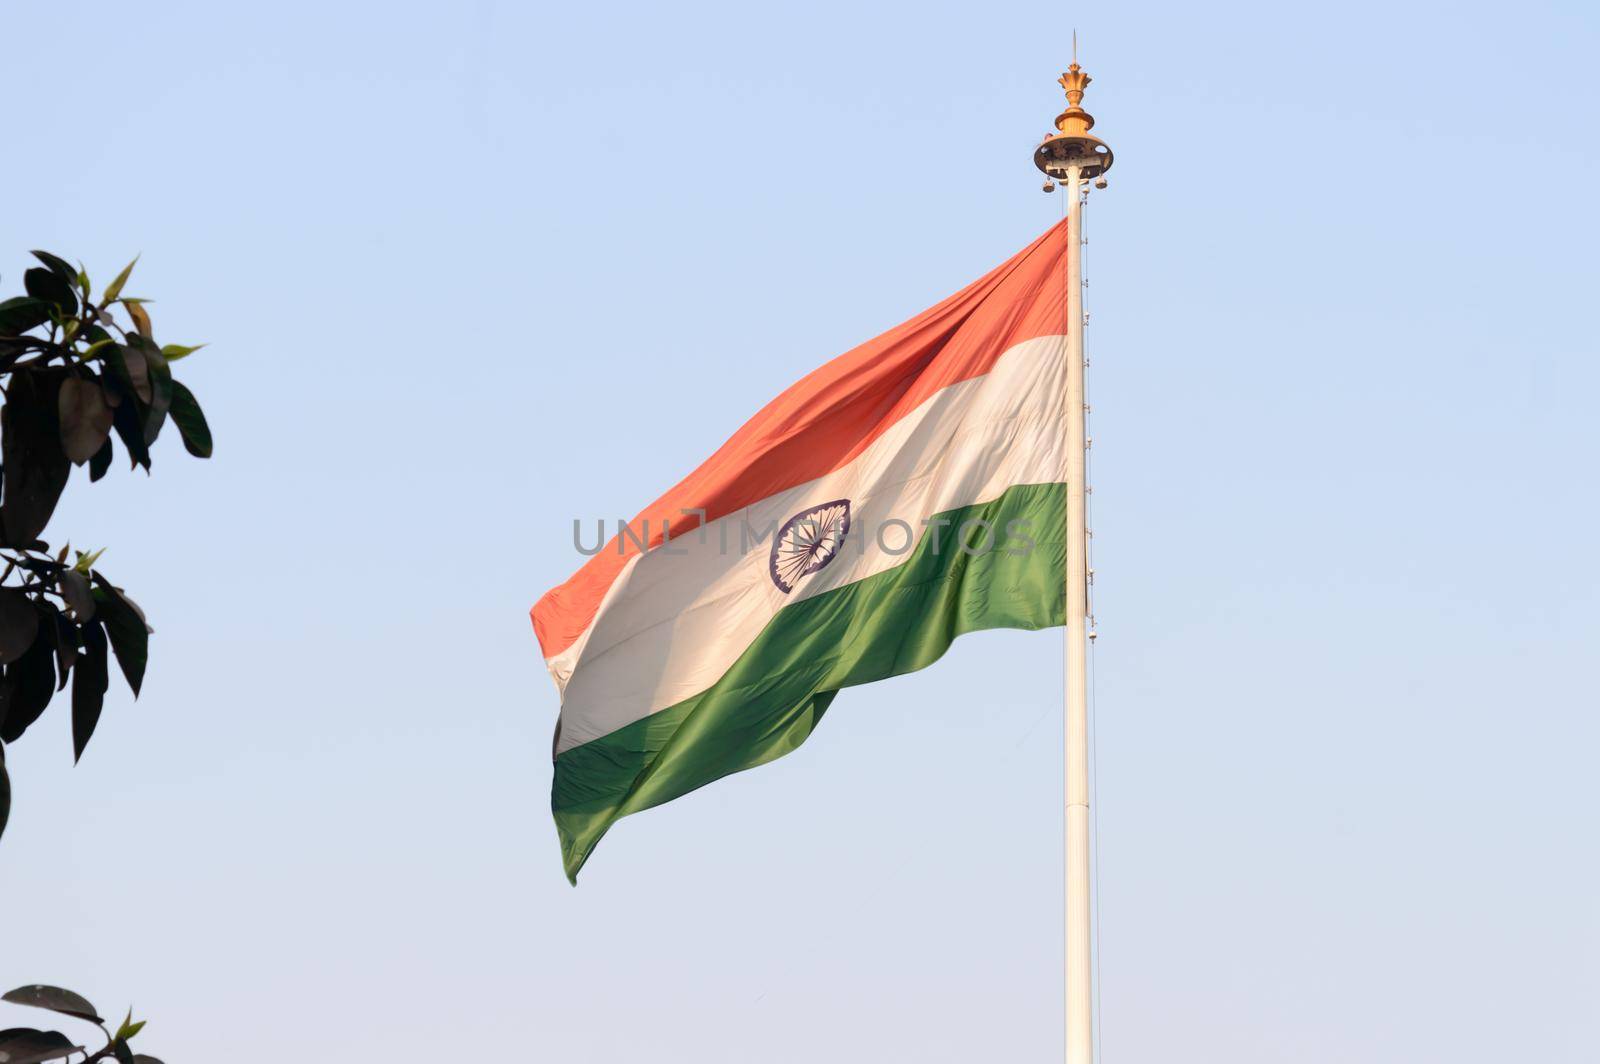 Indian flag flying against blue sky background. The National Flag of India is a horizontal rectangular tricolor (saffron, white and green color) with the Ashoka Chakra at its center. by sudiptabhowmick